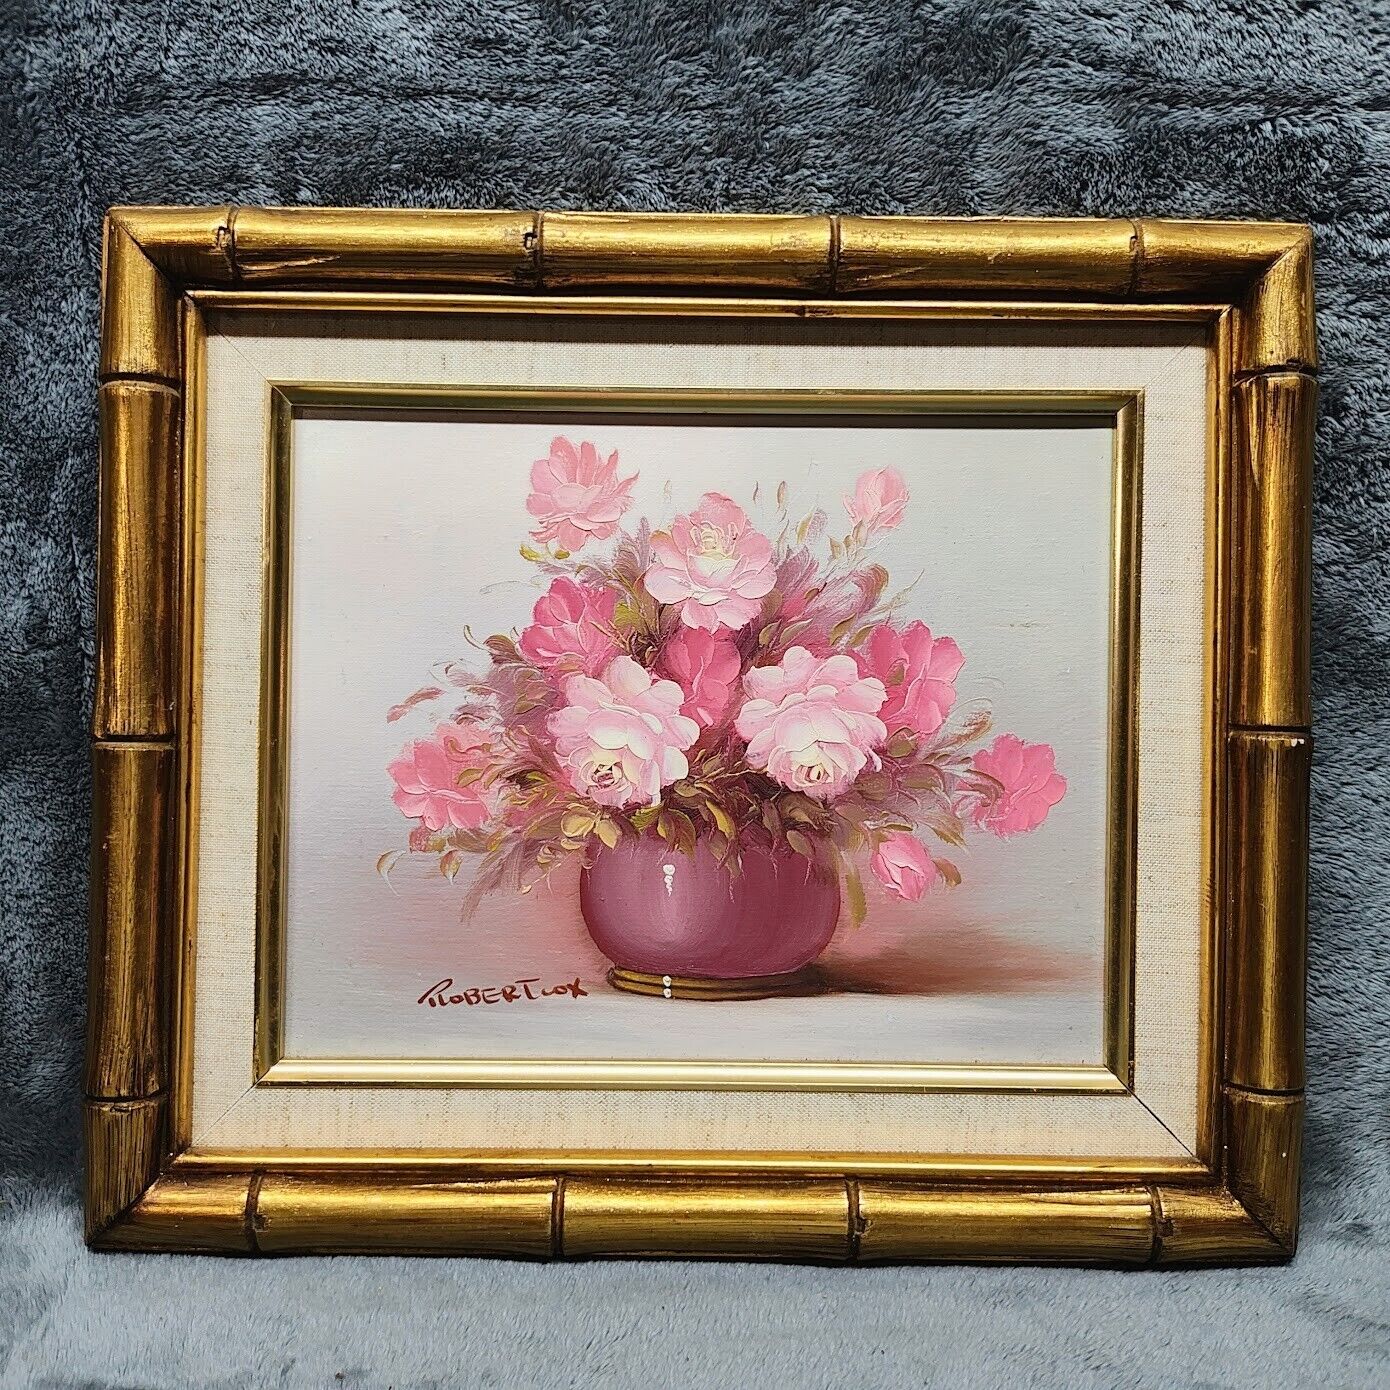 Vintage Robert Cox Signed Oil Painting Floral Still Life 8 x 10 on Board Framed 